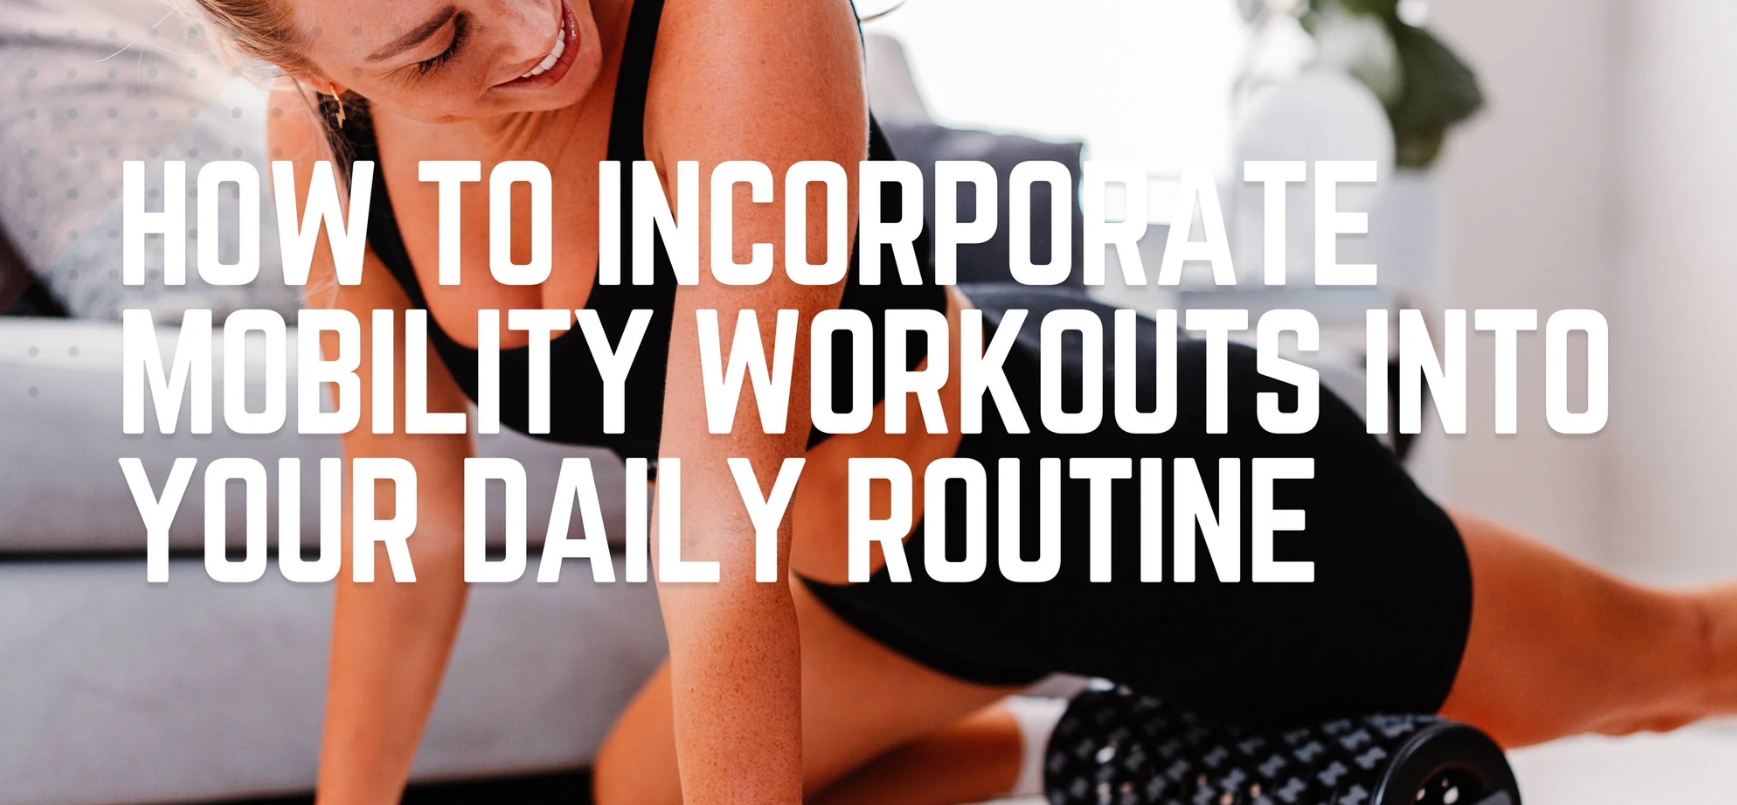 mobility to gym routines infinite fitness peninsula